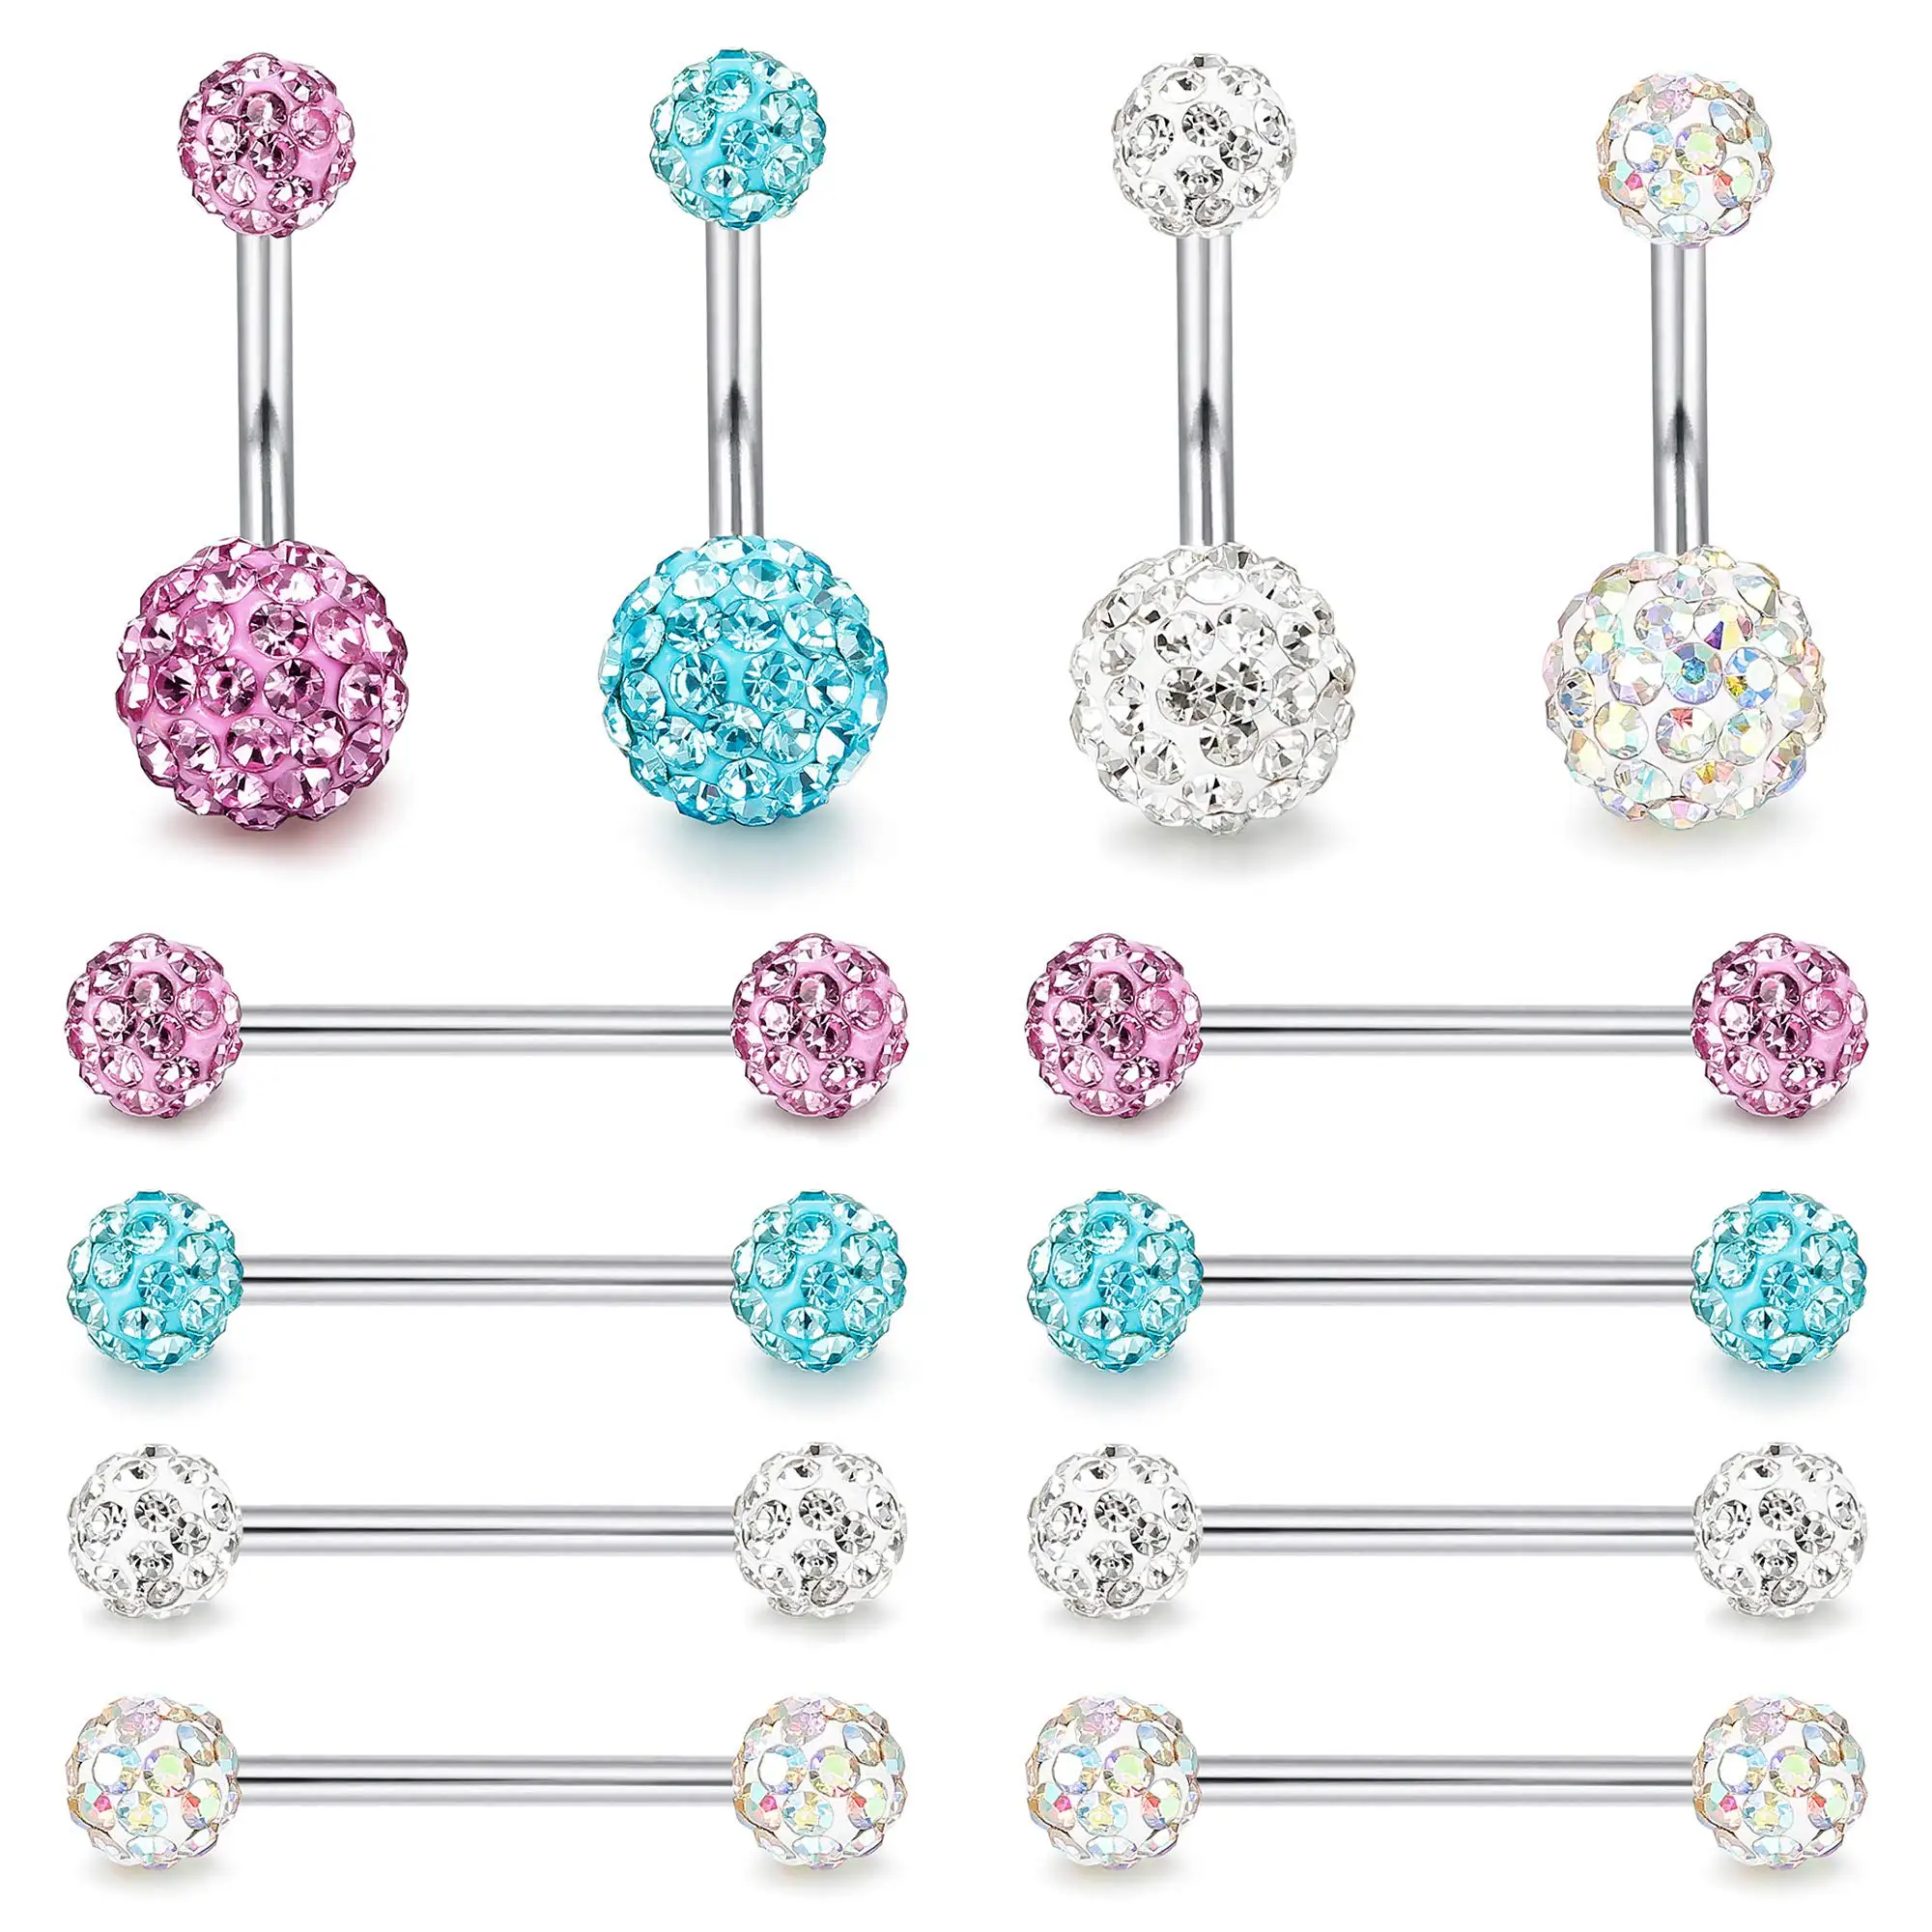 

1-12Pcs 14G Nipple Tongue Belly Button Ring Stainless Steel Rhinestone Crystal Ball Barbell Body Piercing Jewelry CZ Blue Purple